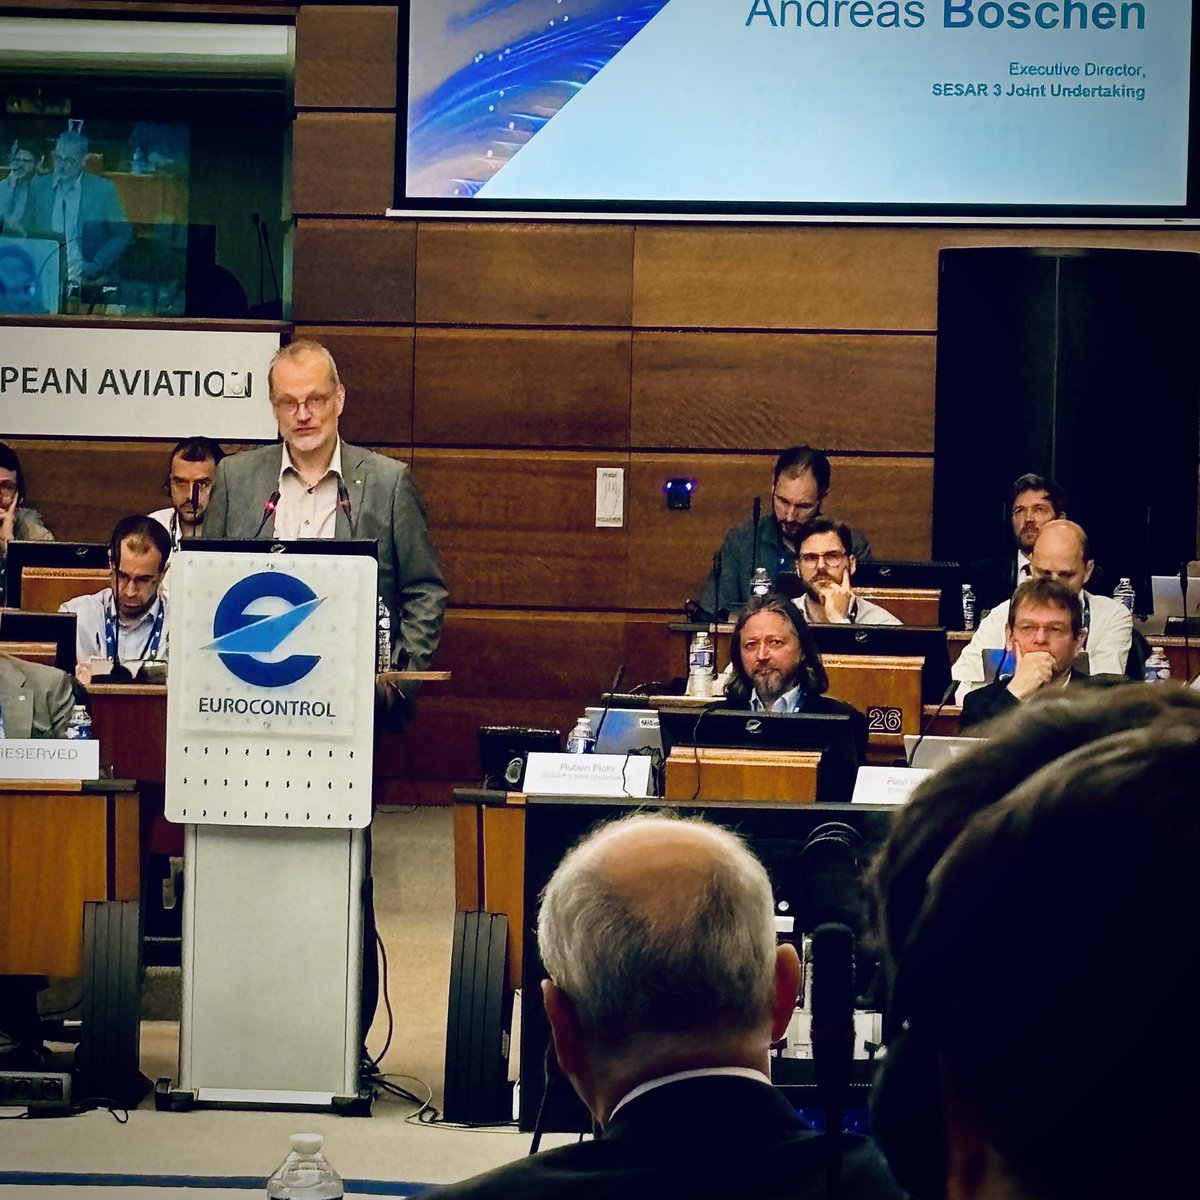 Opening #FLYAI conference, our ED @BoschenAndreas invites audience to #explore and #exploit #AI through #collaboration on #research and #innovation. Together, we can revolutionise #ATM for safer skies and efficient travel #AI #SESAR #ATM #Collaboration 💪✈️💚🇪🇺✈️👏